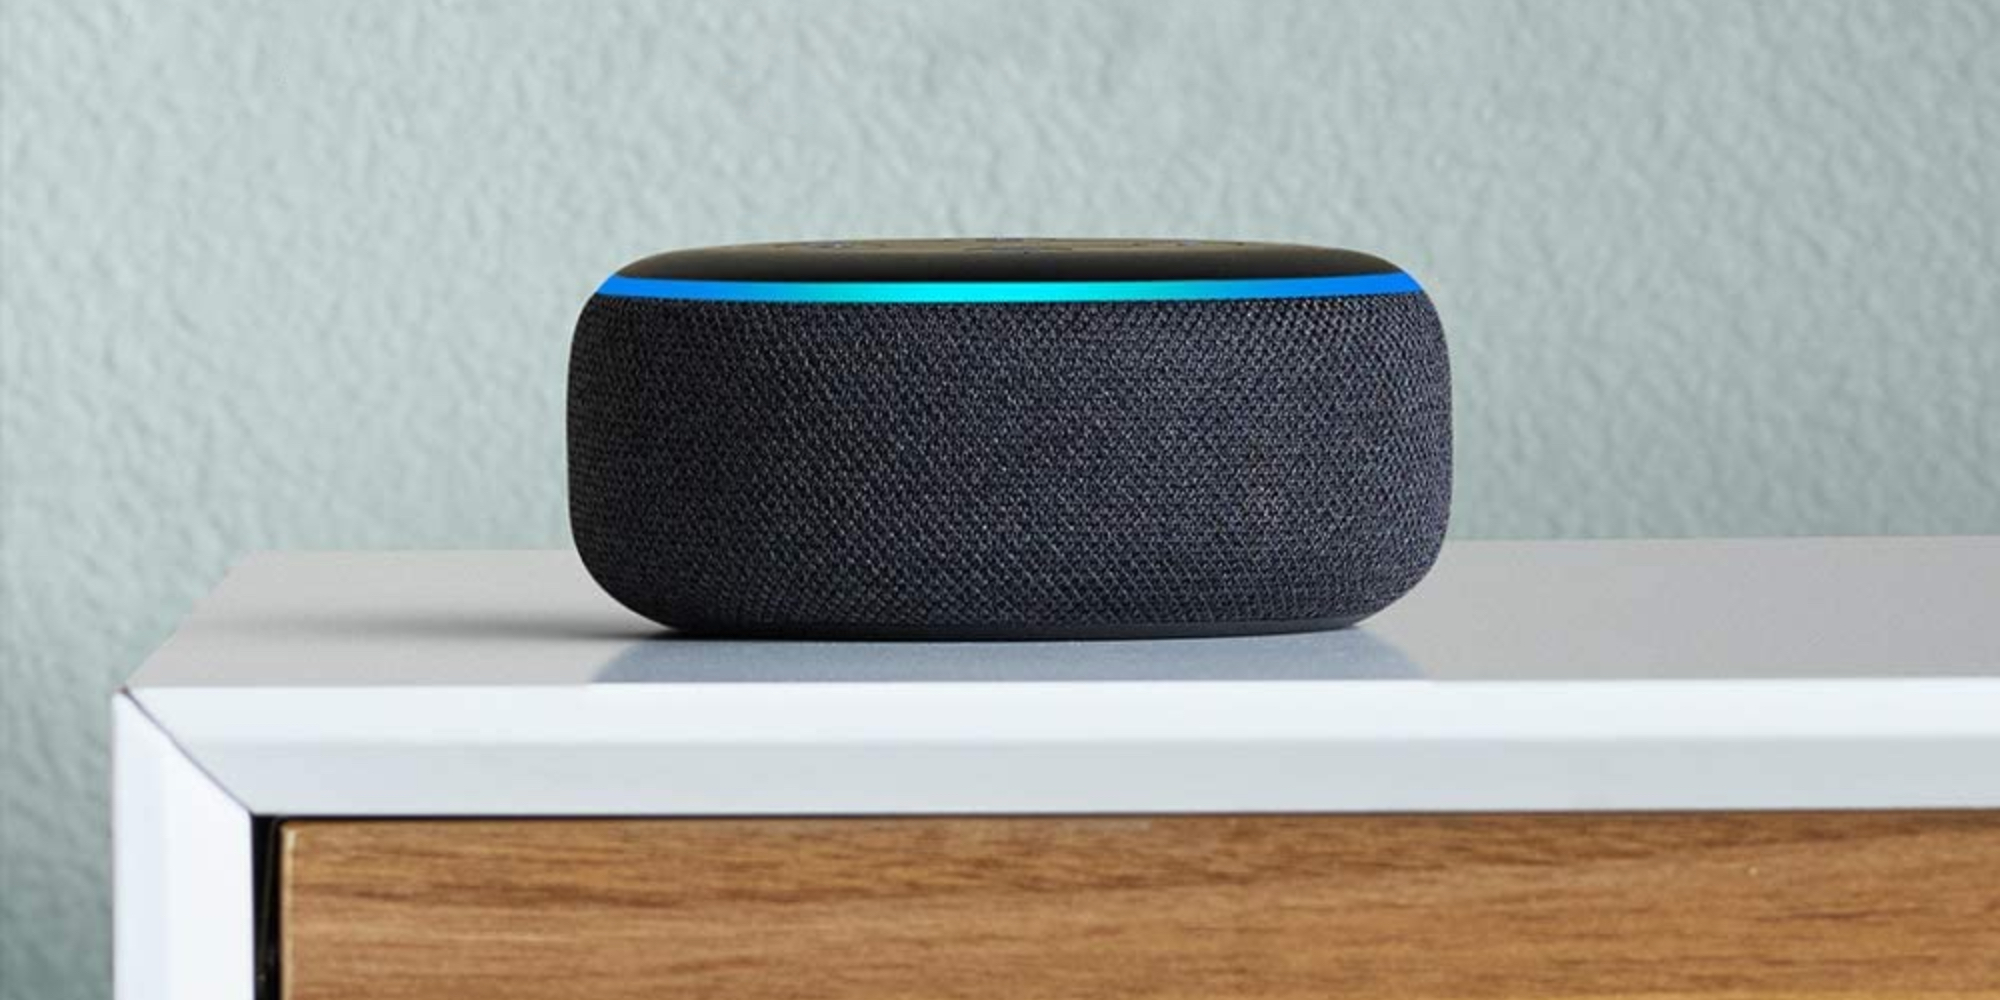 Get an  Echo Dot for $0.99 with  Music Unlimited